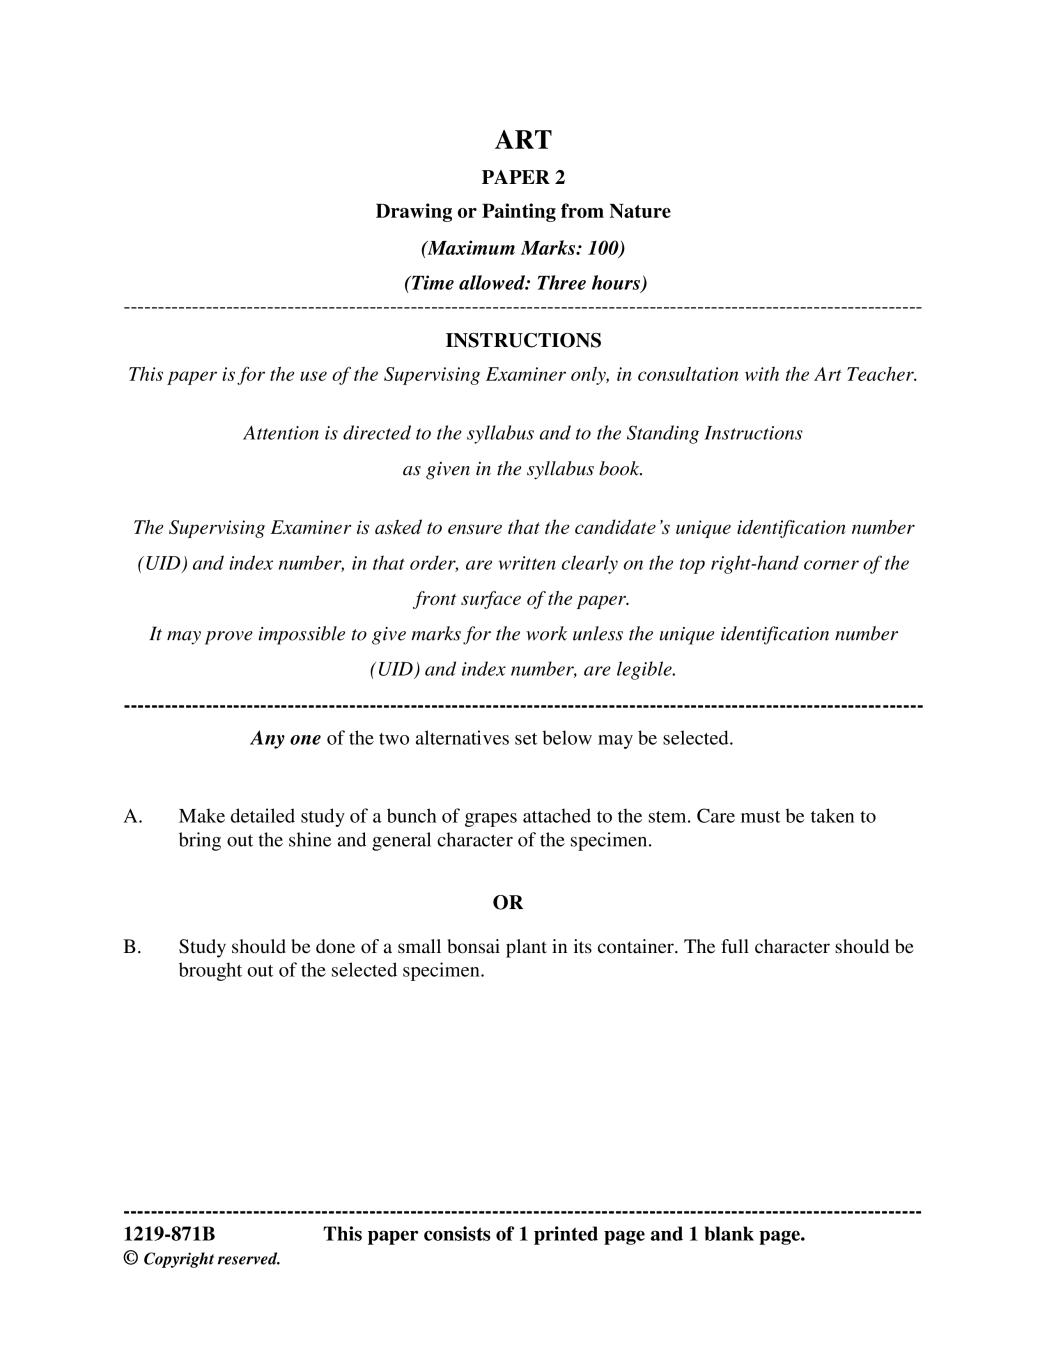 ISC Class 12 Question Paper 2019 for Art Paper 2 - Page 1